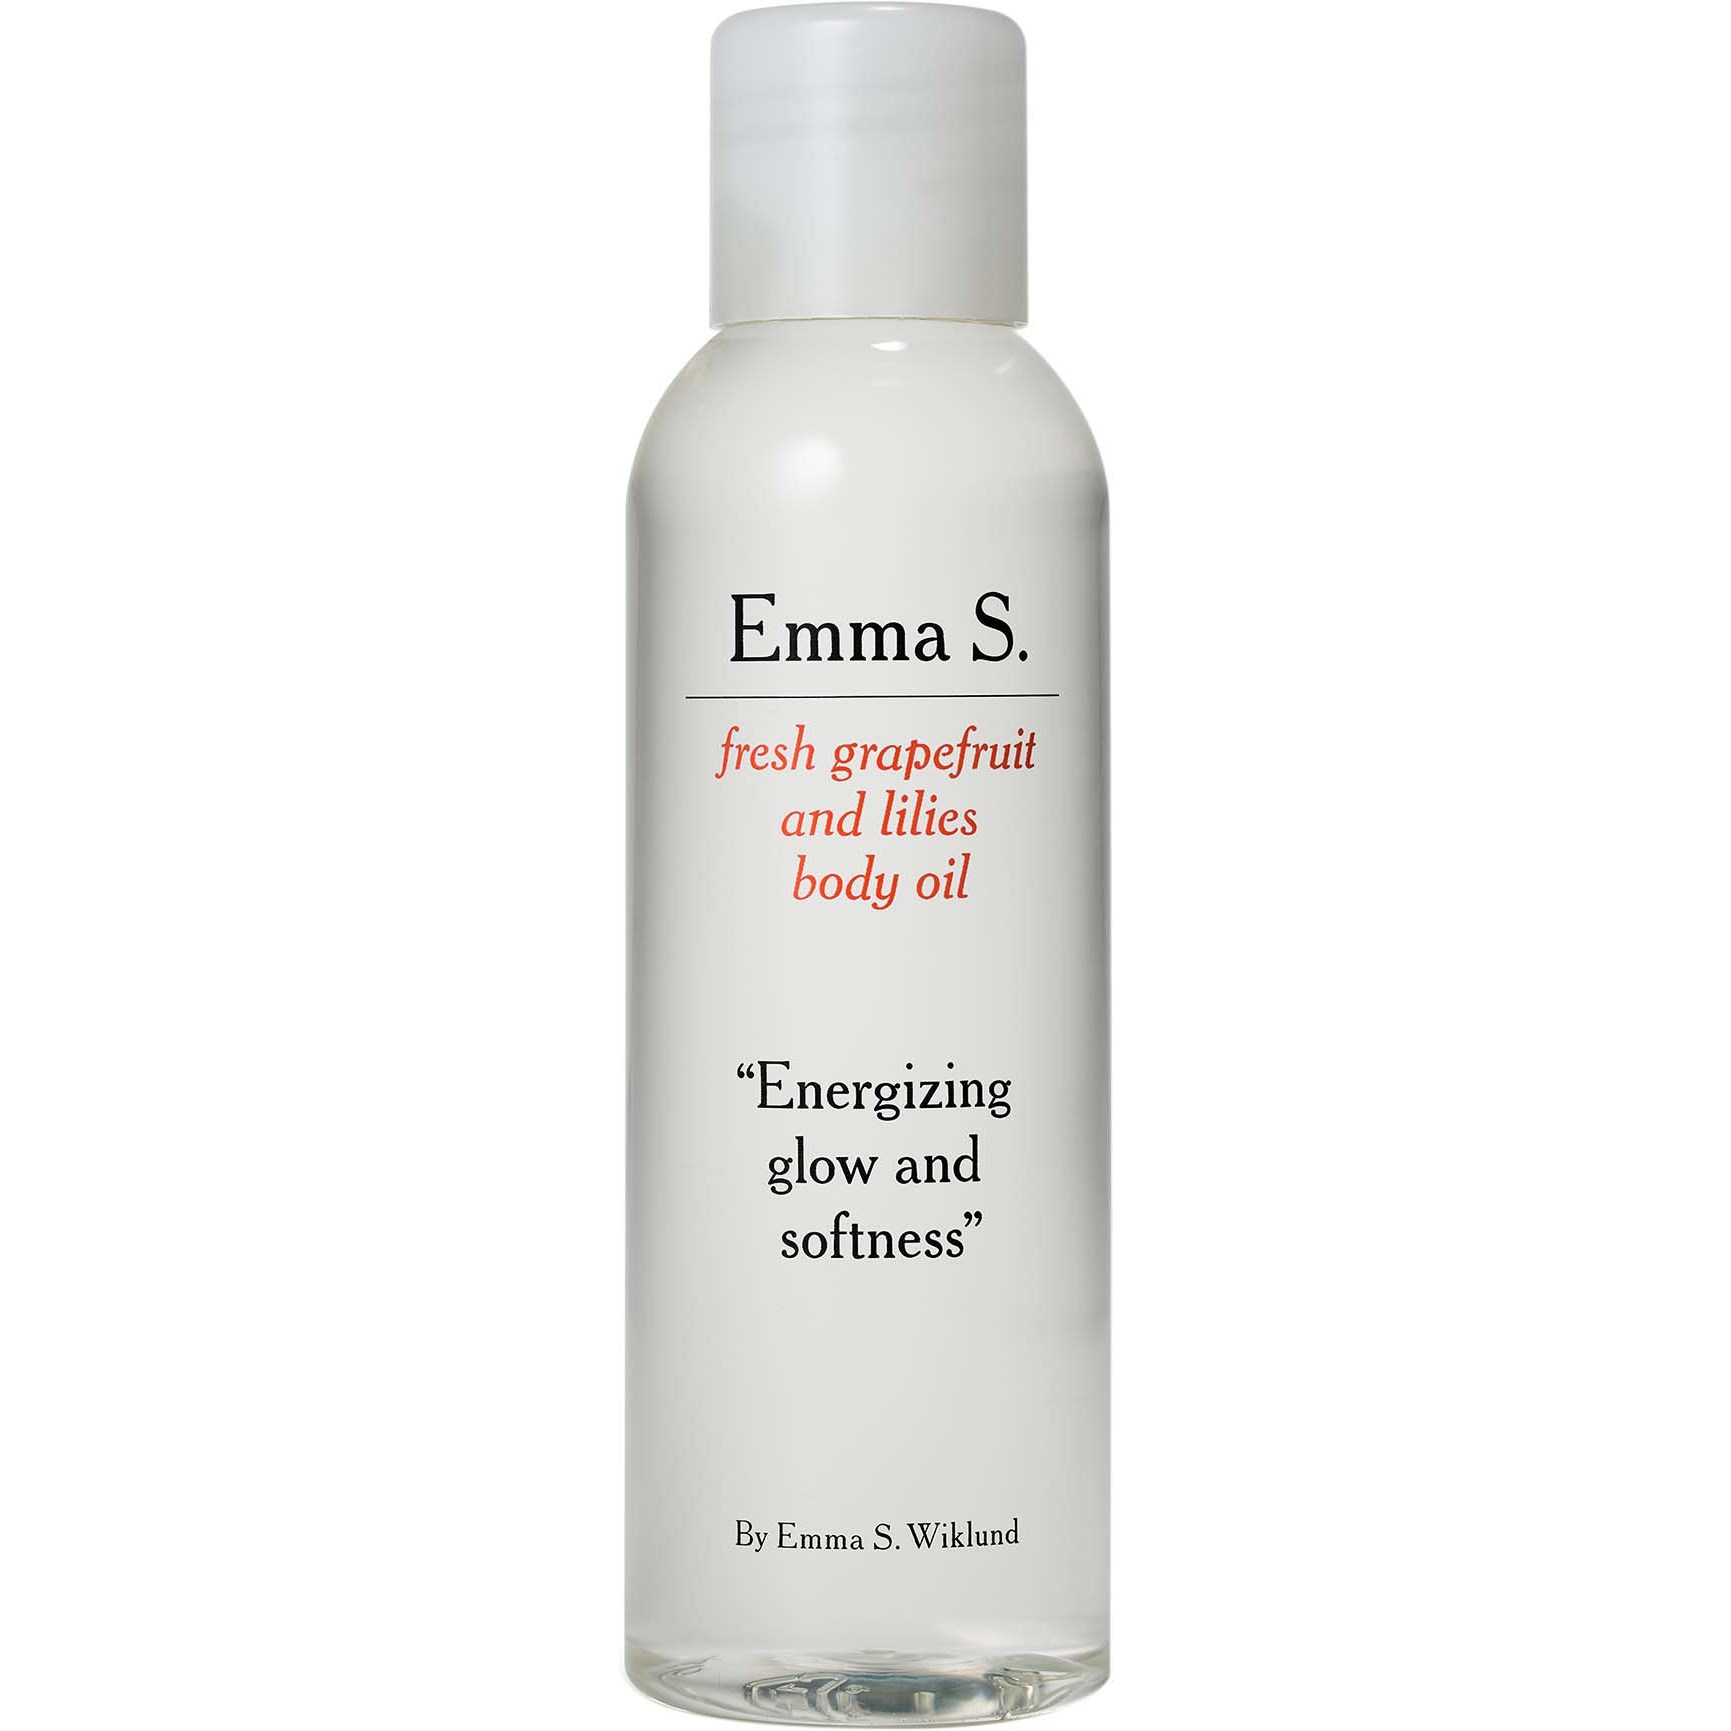 Emma S. Fresh Grapefruit And Lilies Body Oil